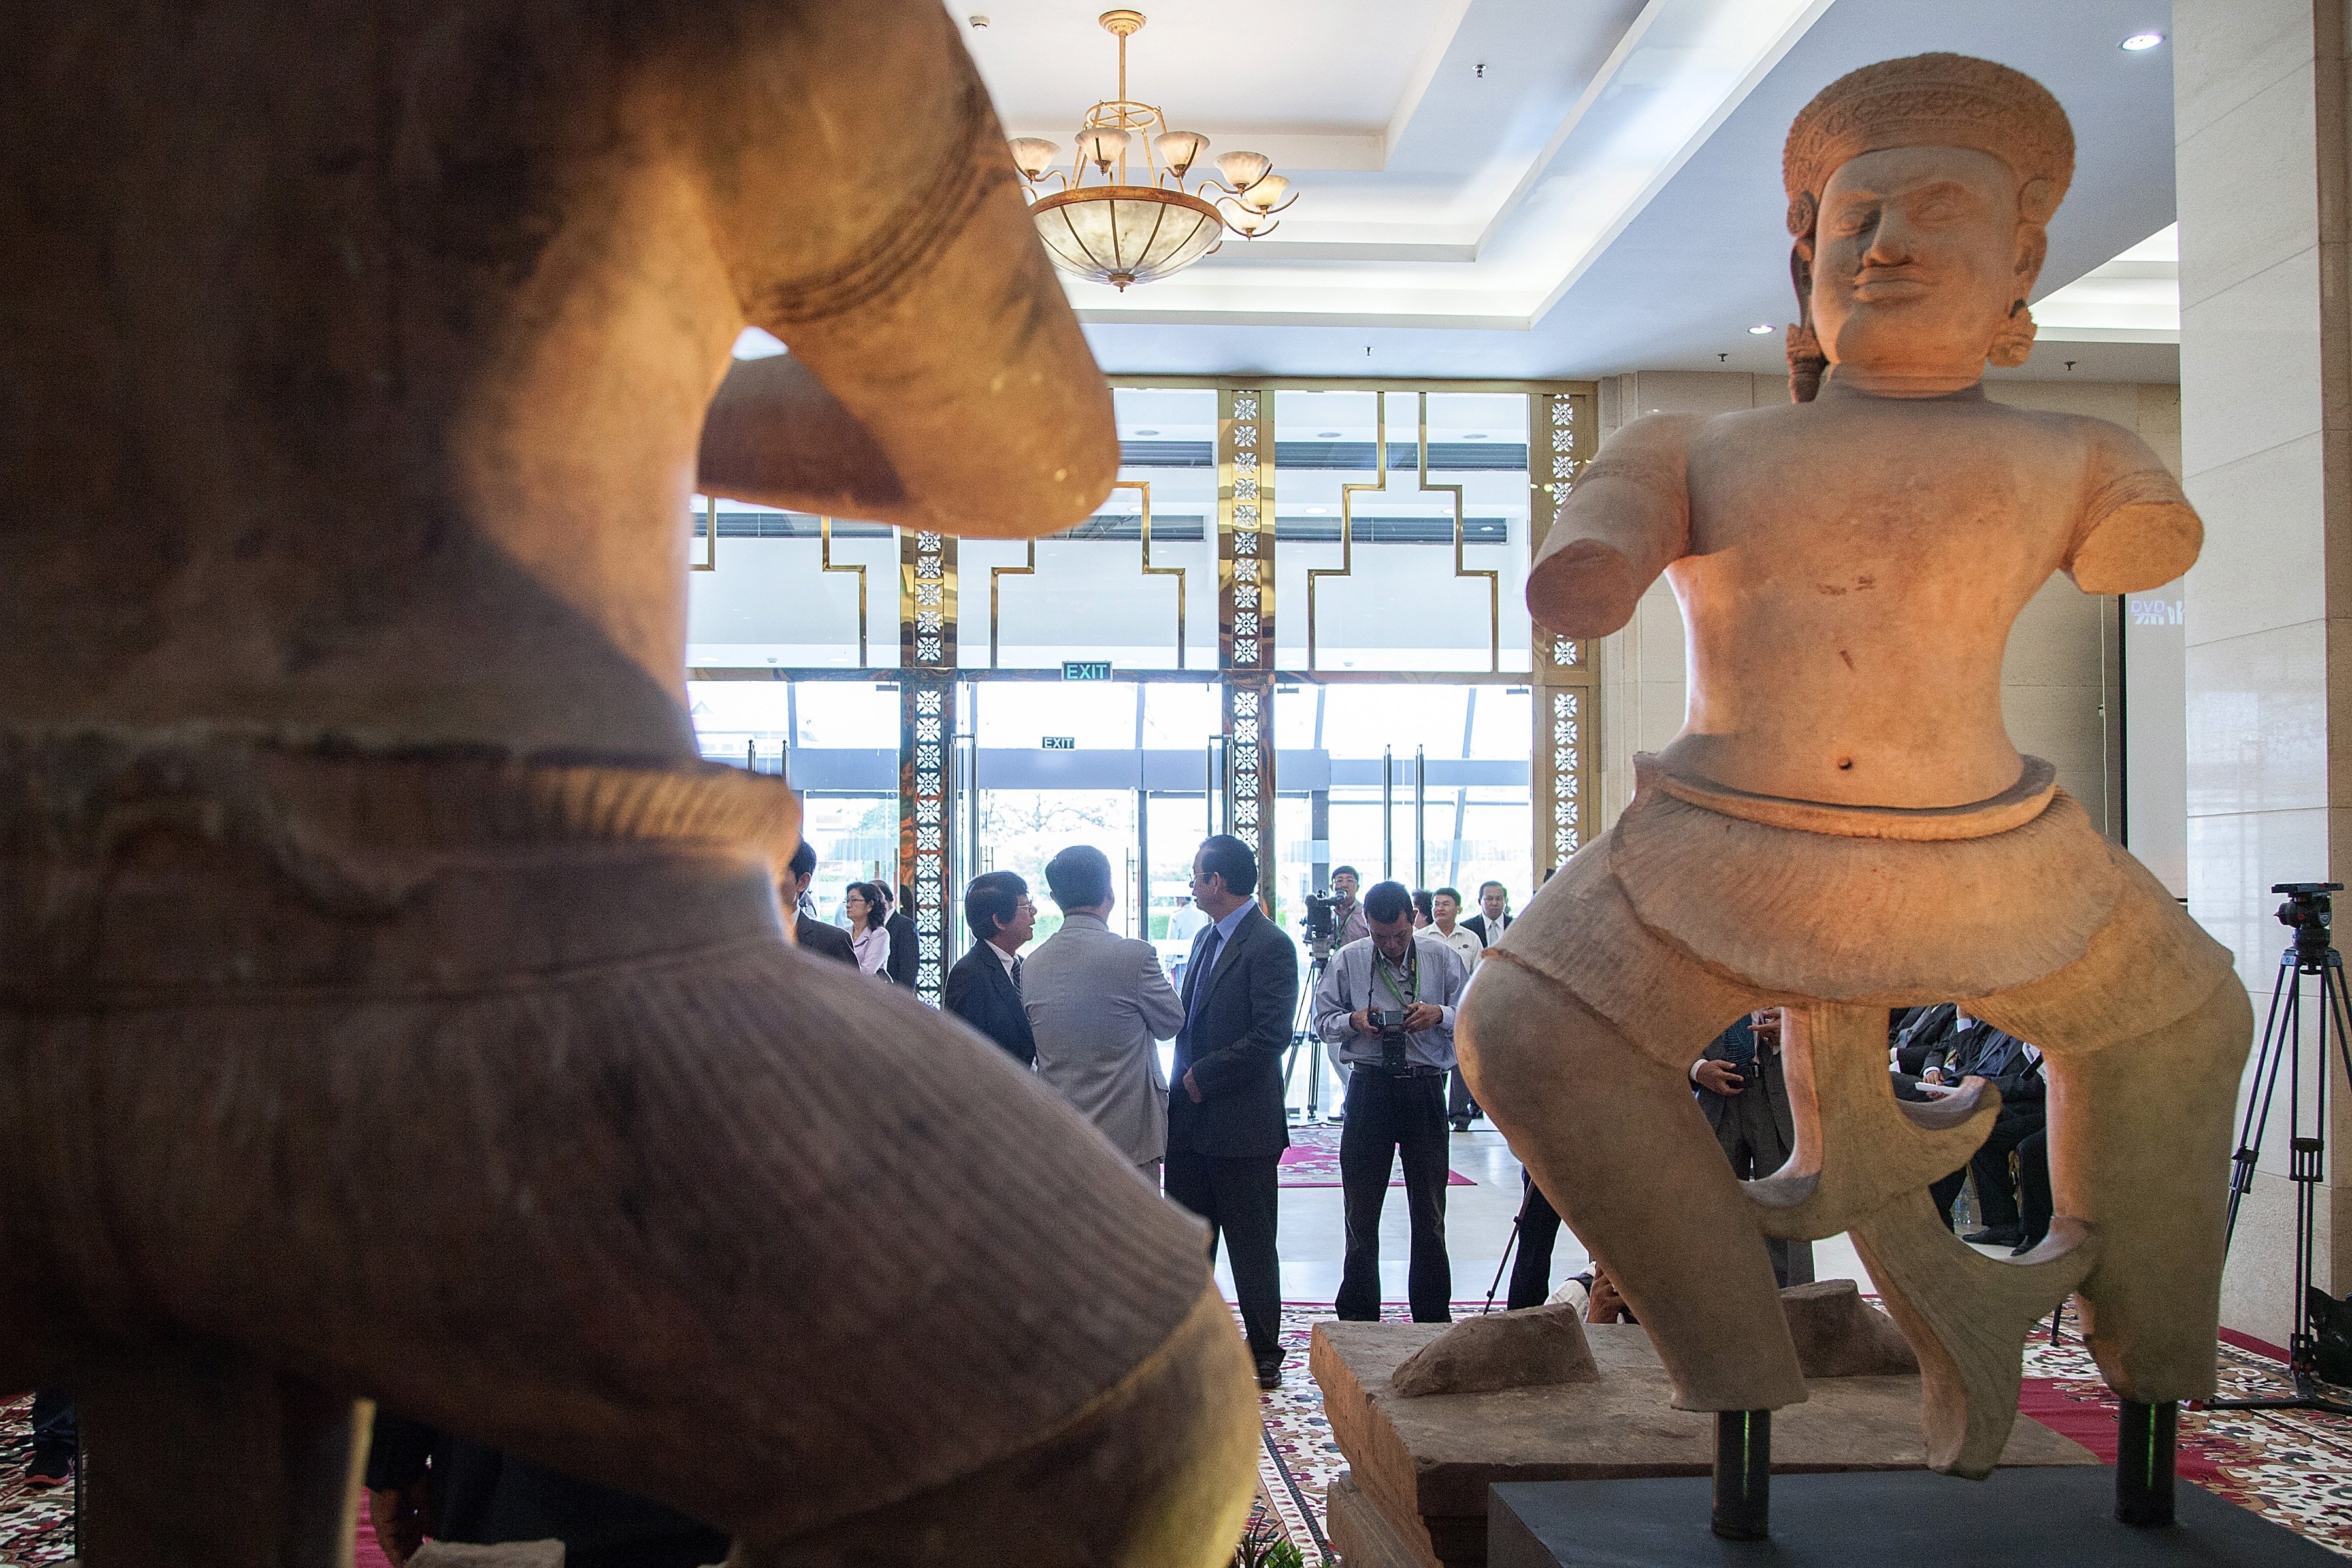 PHNOM PENH, CAMBODIA - JUNE 03:  The Bhima (left) and the Duryodhama (right) statues are displayed during a ceremony to handover three statues back to Cambodia at the Council of Ministers on June 3, 2014 in Phnom Penh, Cambodia. The Bhima statue is unveiled during an official ceremony at the Council of Ministers in Cambodia. It is one of several statues looted from the Koh Ker temple complex in Cambodia in the 1970s, ending up in private collections and in museums in the United States, which represent key figures from the Mahabharata, a Sanskrit epic describing a wrestling match between ancient warriors. The Norton Simon Museum announced on May 3rd that it would repatriate the Bhima statue, which it acquired from a New York art dealer in 1976, to Cambodia. The Bhima statue is joined by two other statues from the Prasat Chen temple also recently returned to Cambodia: the Duryodhana and the Balarama, which are being returned by auction houses Sotheby’s and Christie’s.  (Photo by Omar…